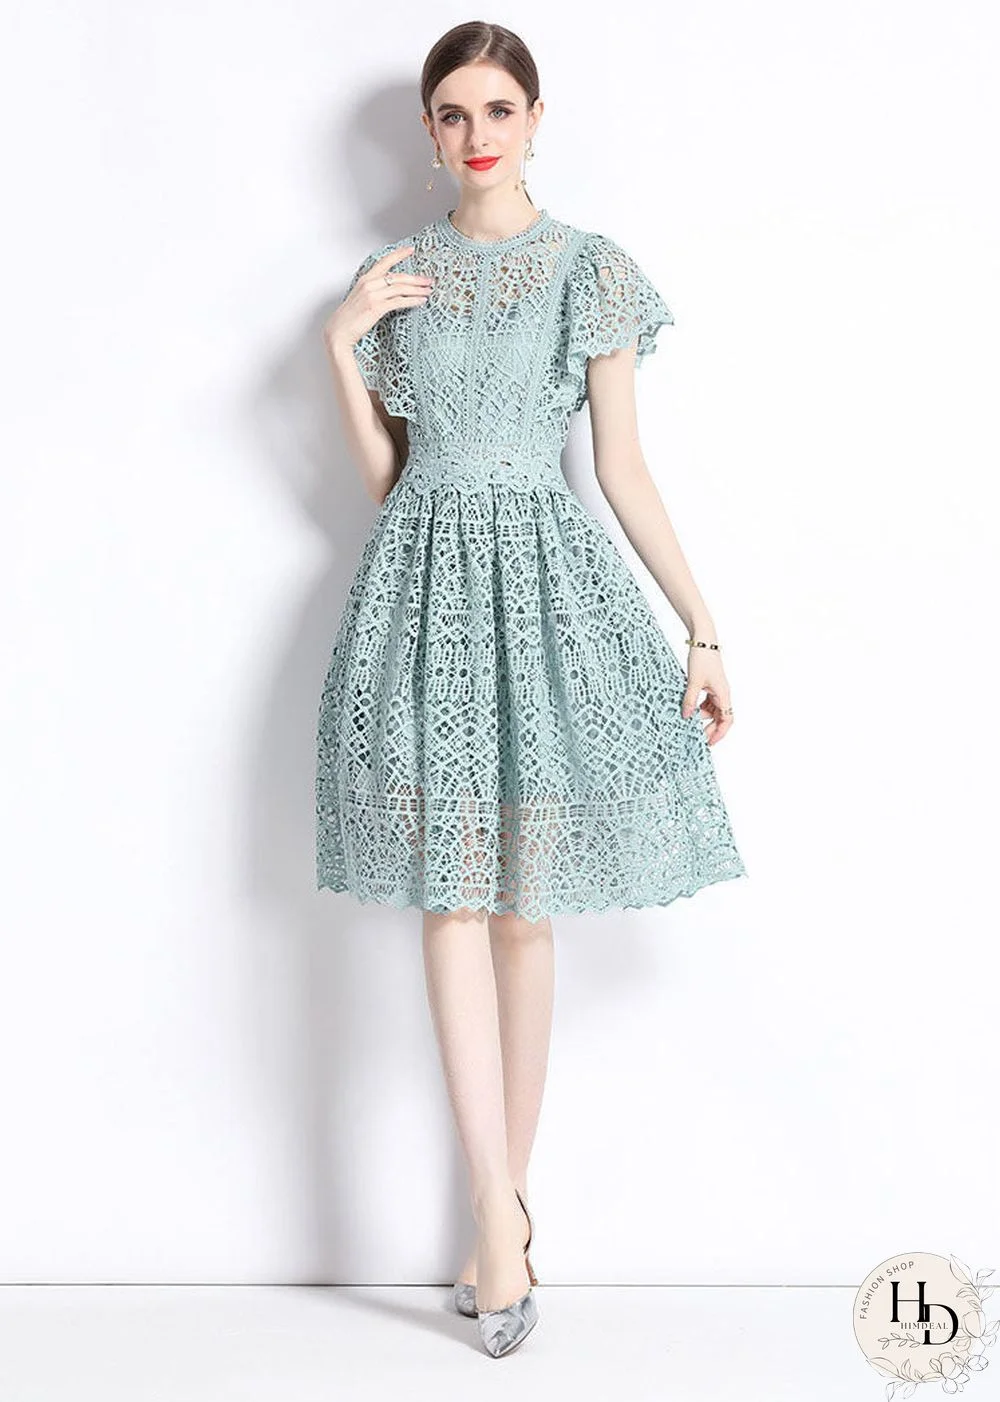 New Hollow Out Embroideried Wrinkled Patchwork Lace Mid Dress Butterfly Sleeve